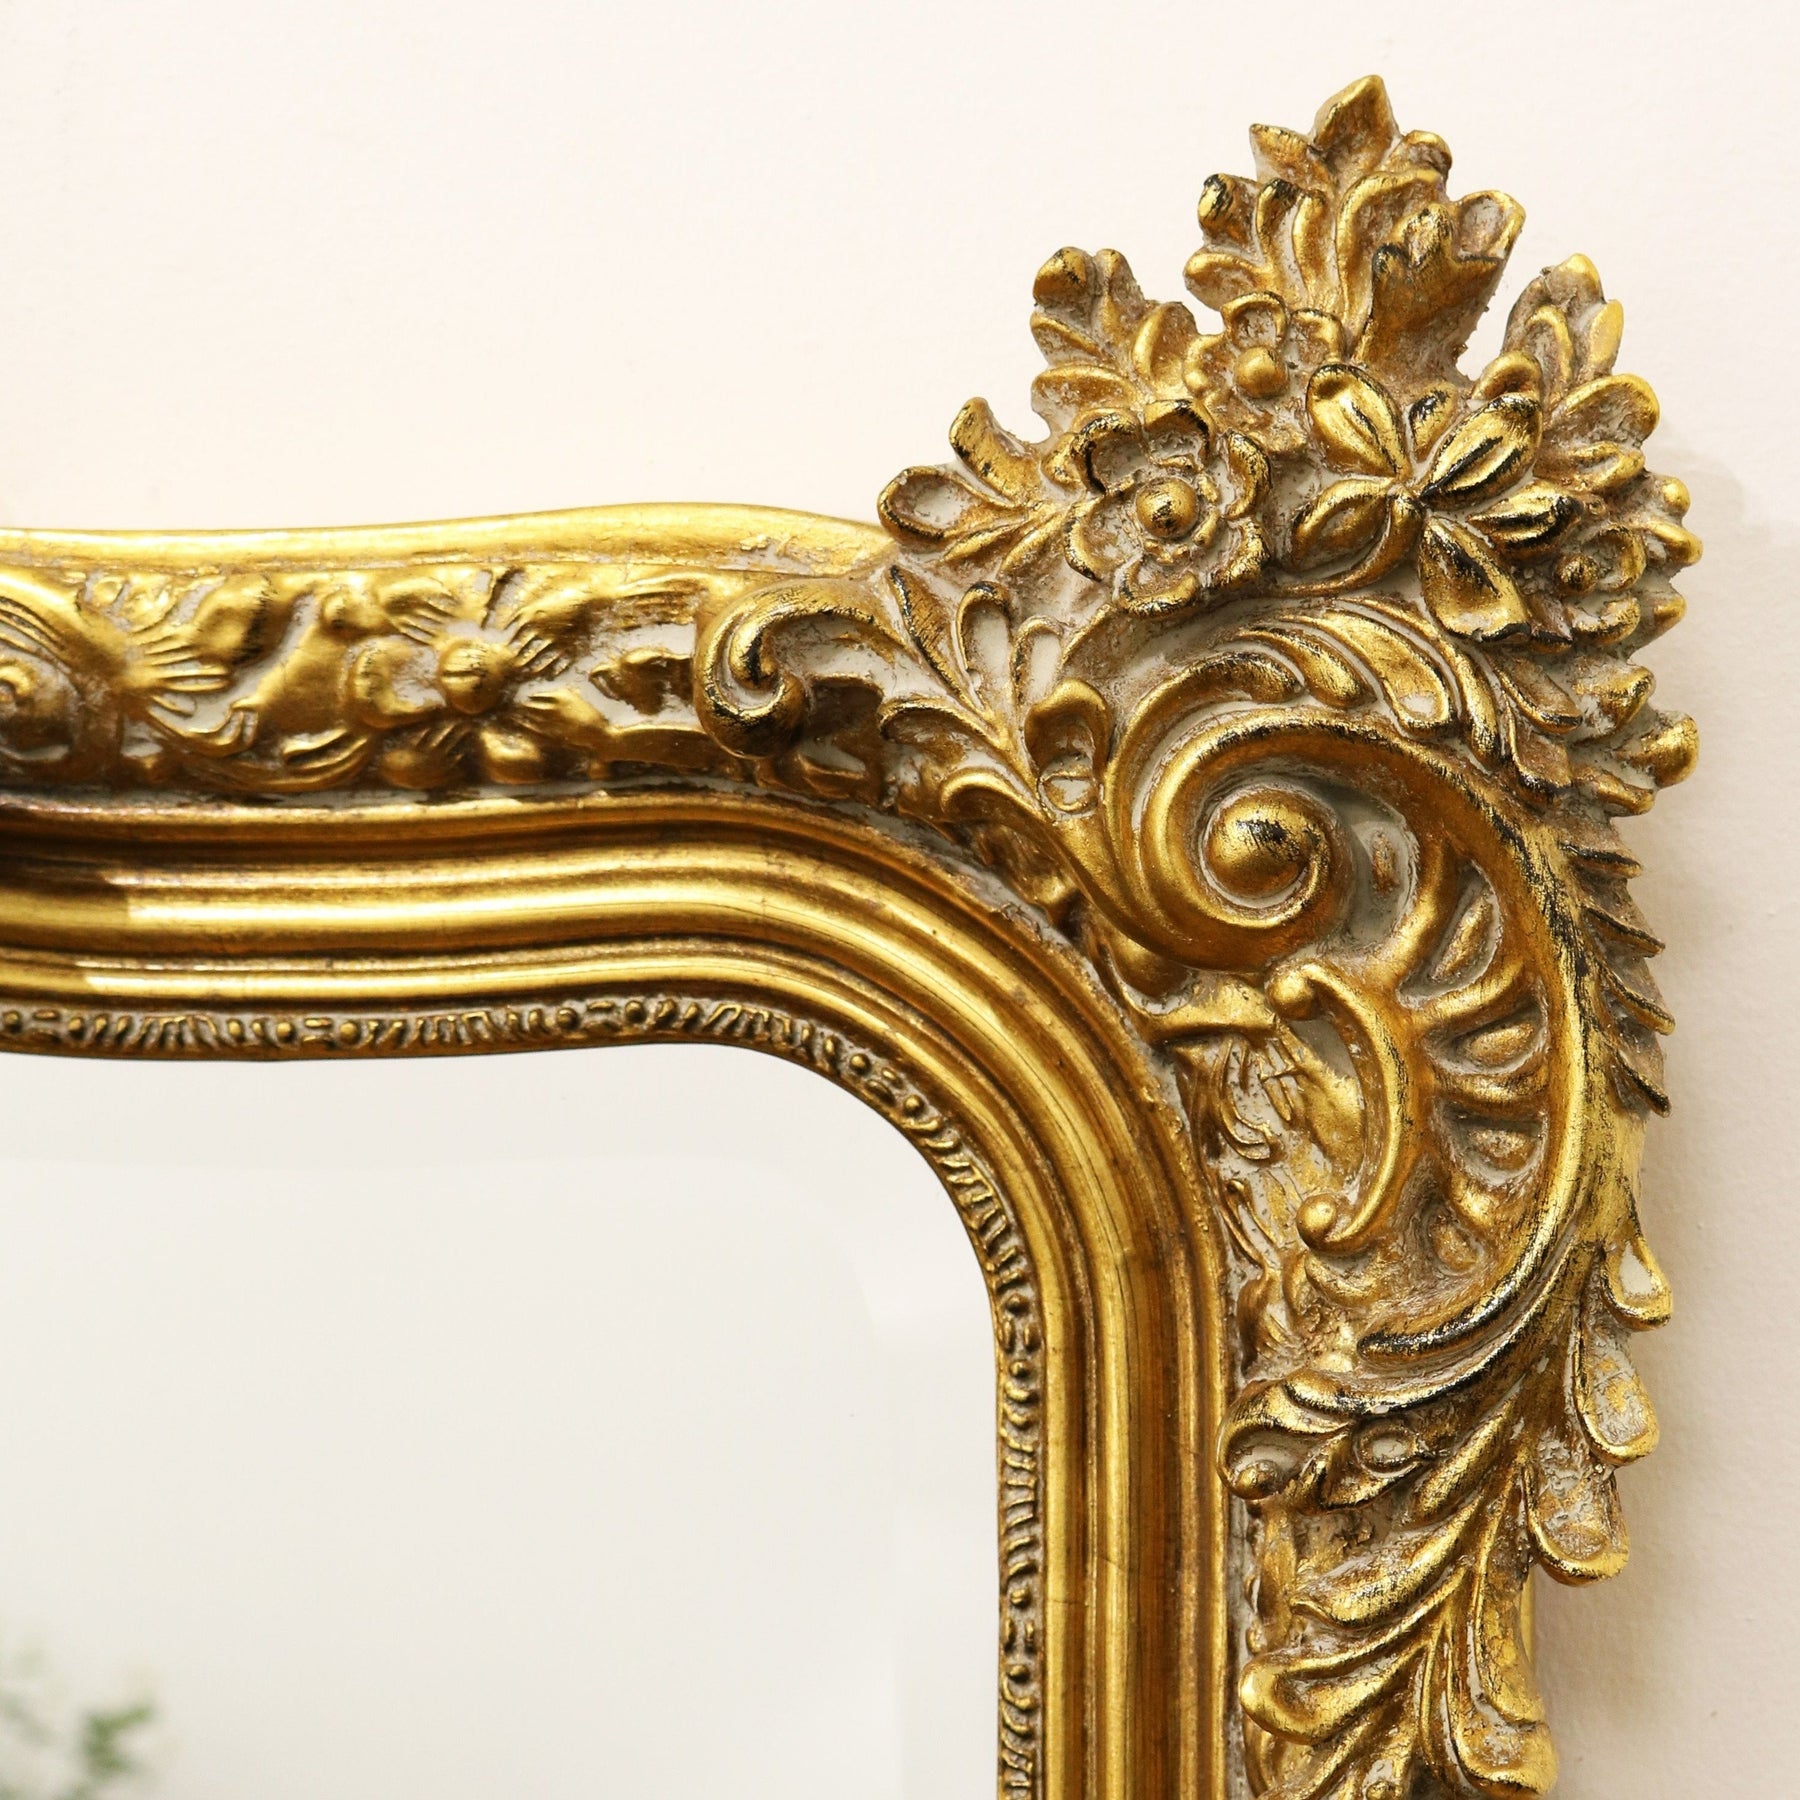 Gold Arched Ornate Overmantle Wall Mirror alternate detail shot of corner